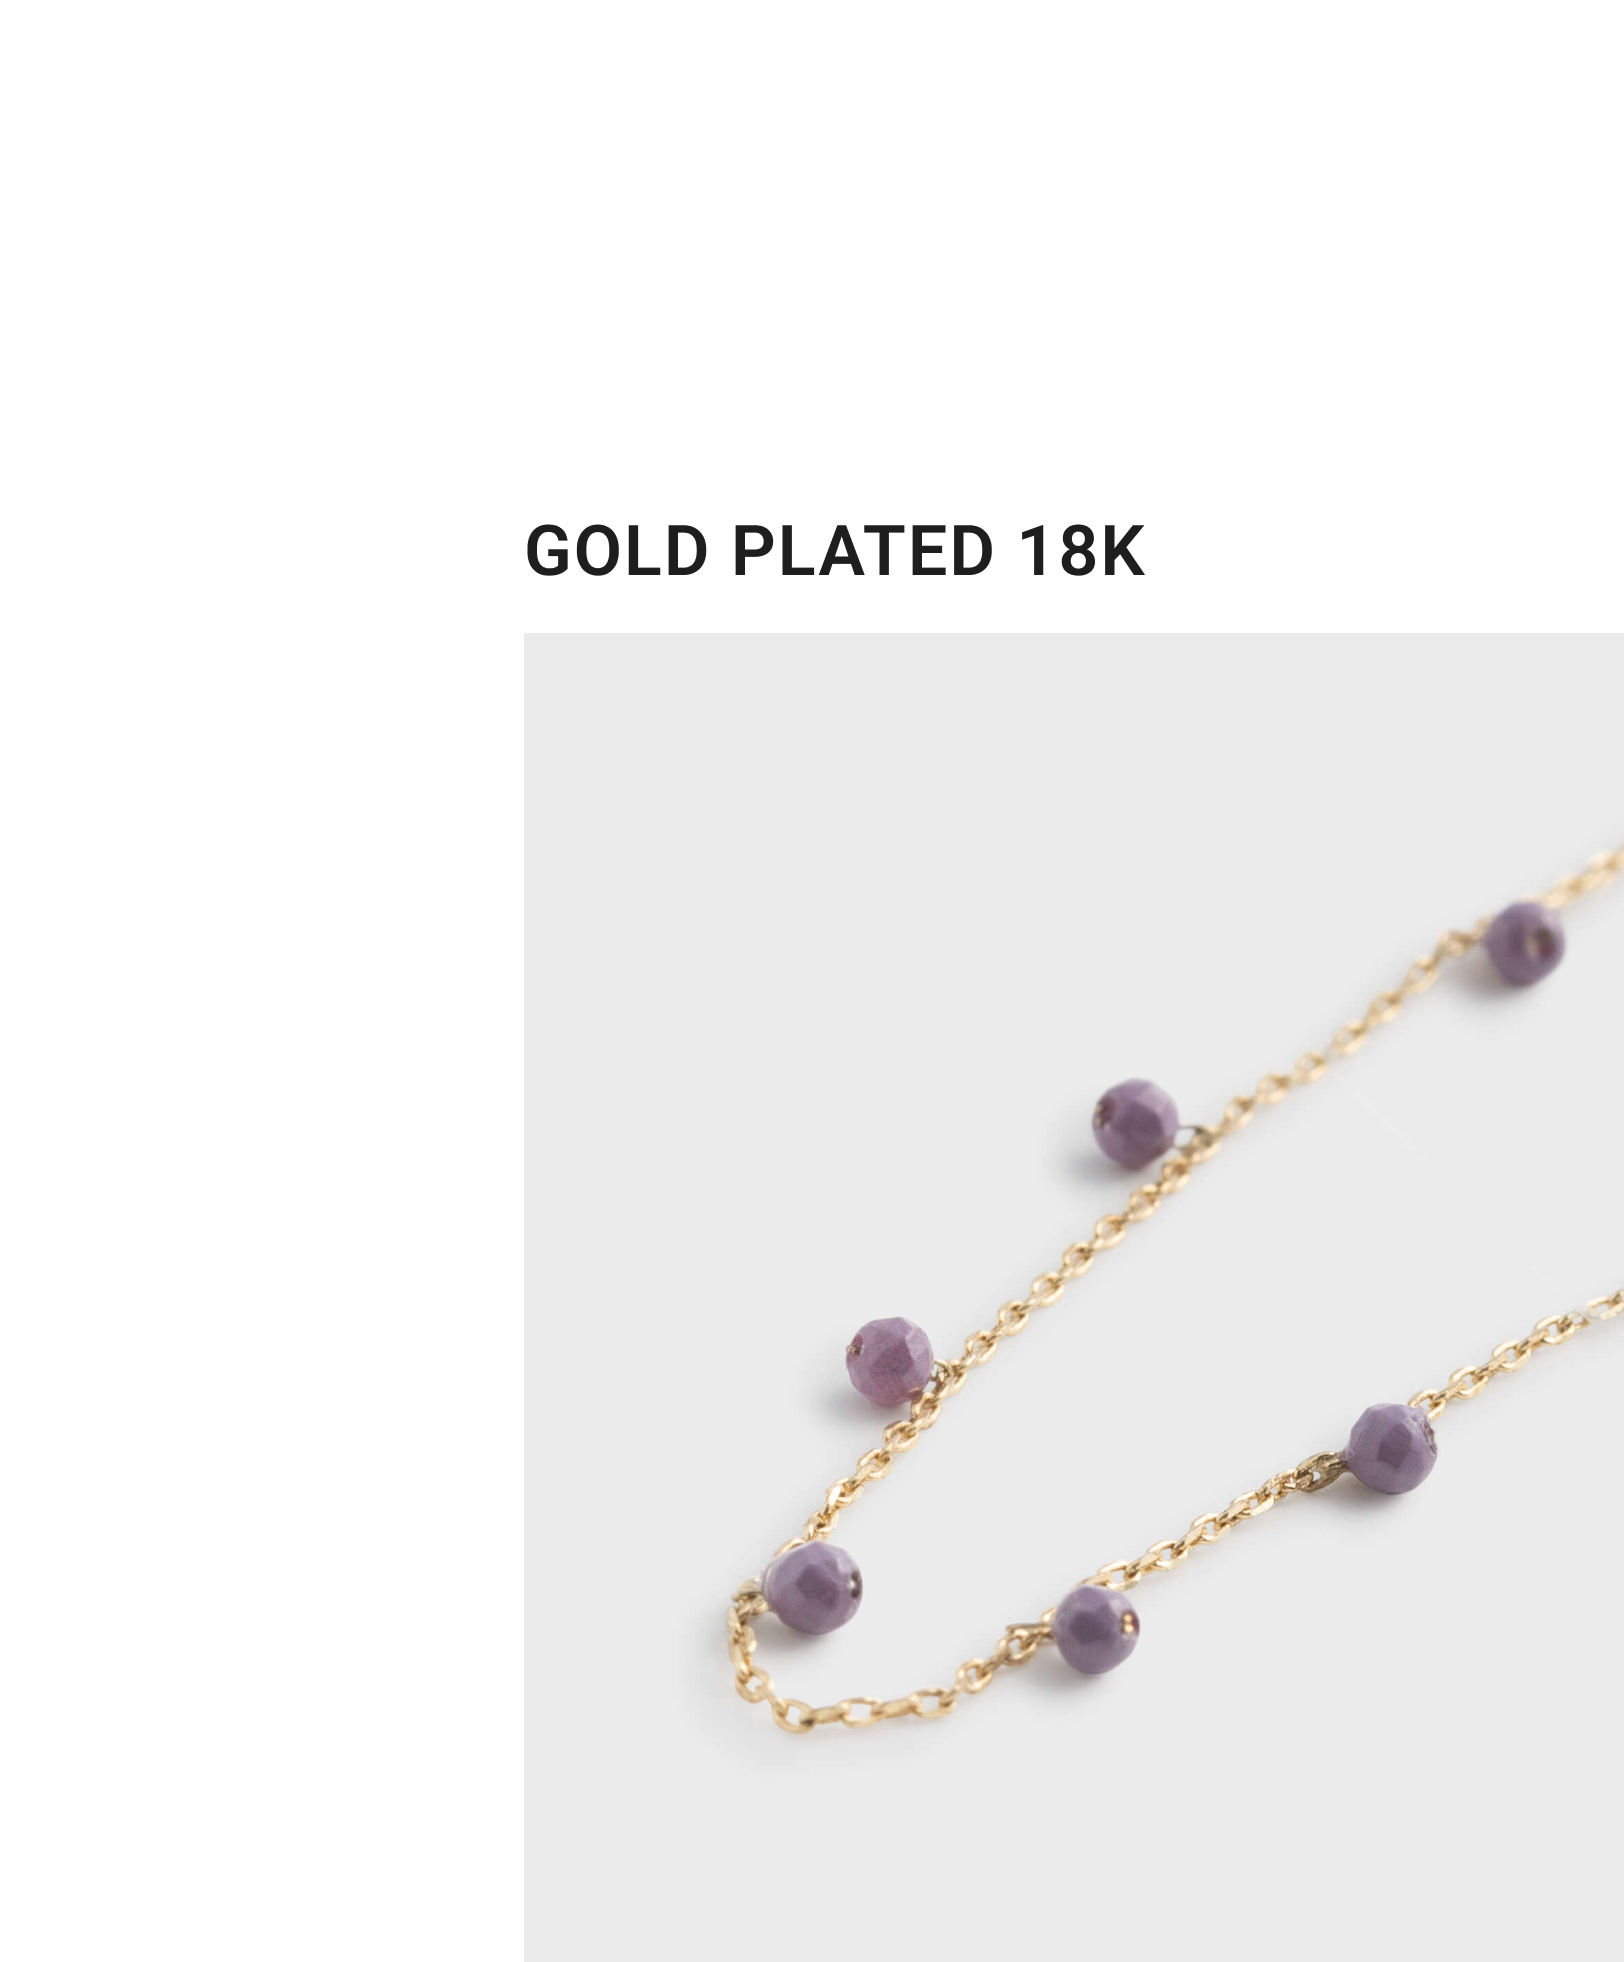 Beaded 18k gold plated necklace